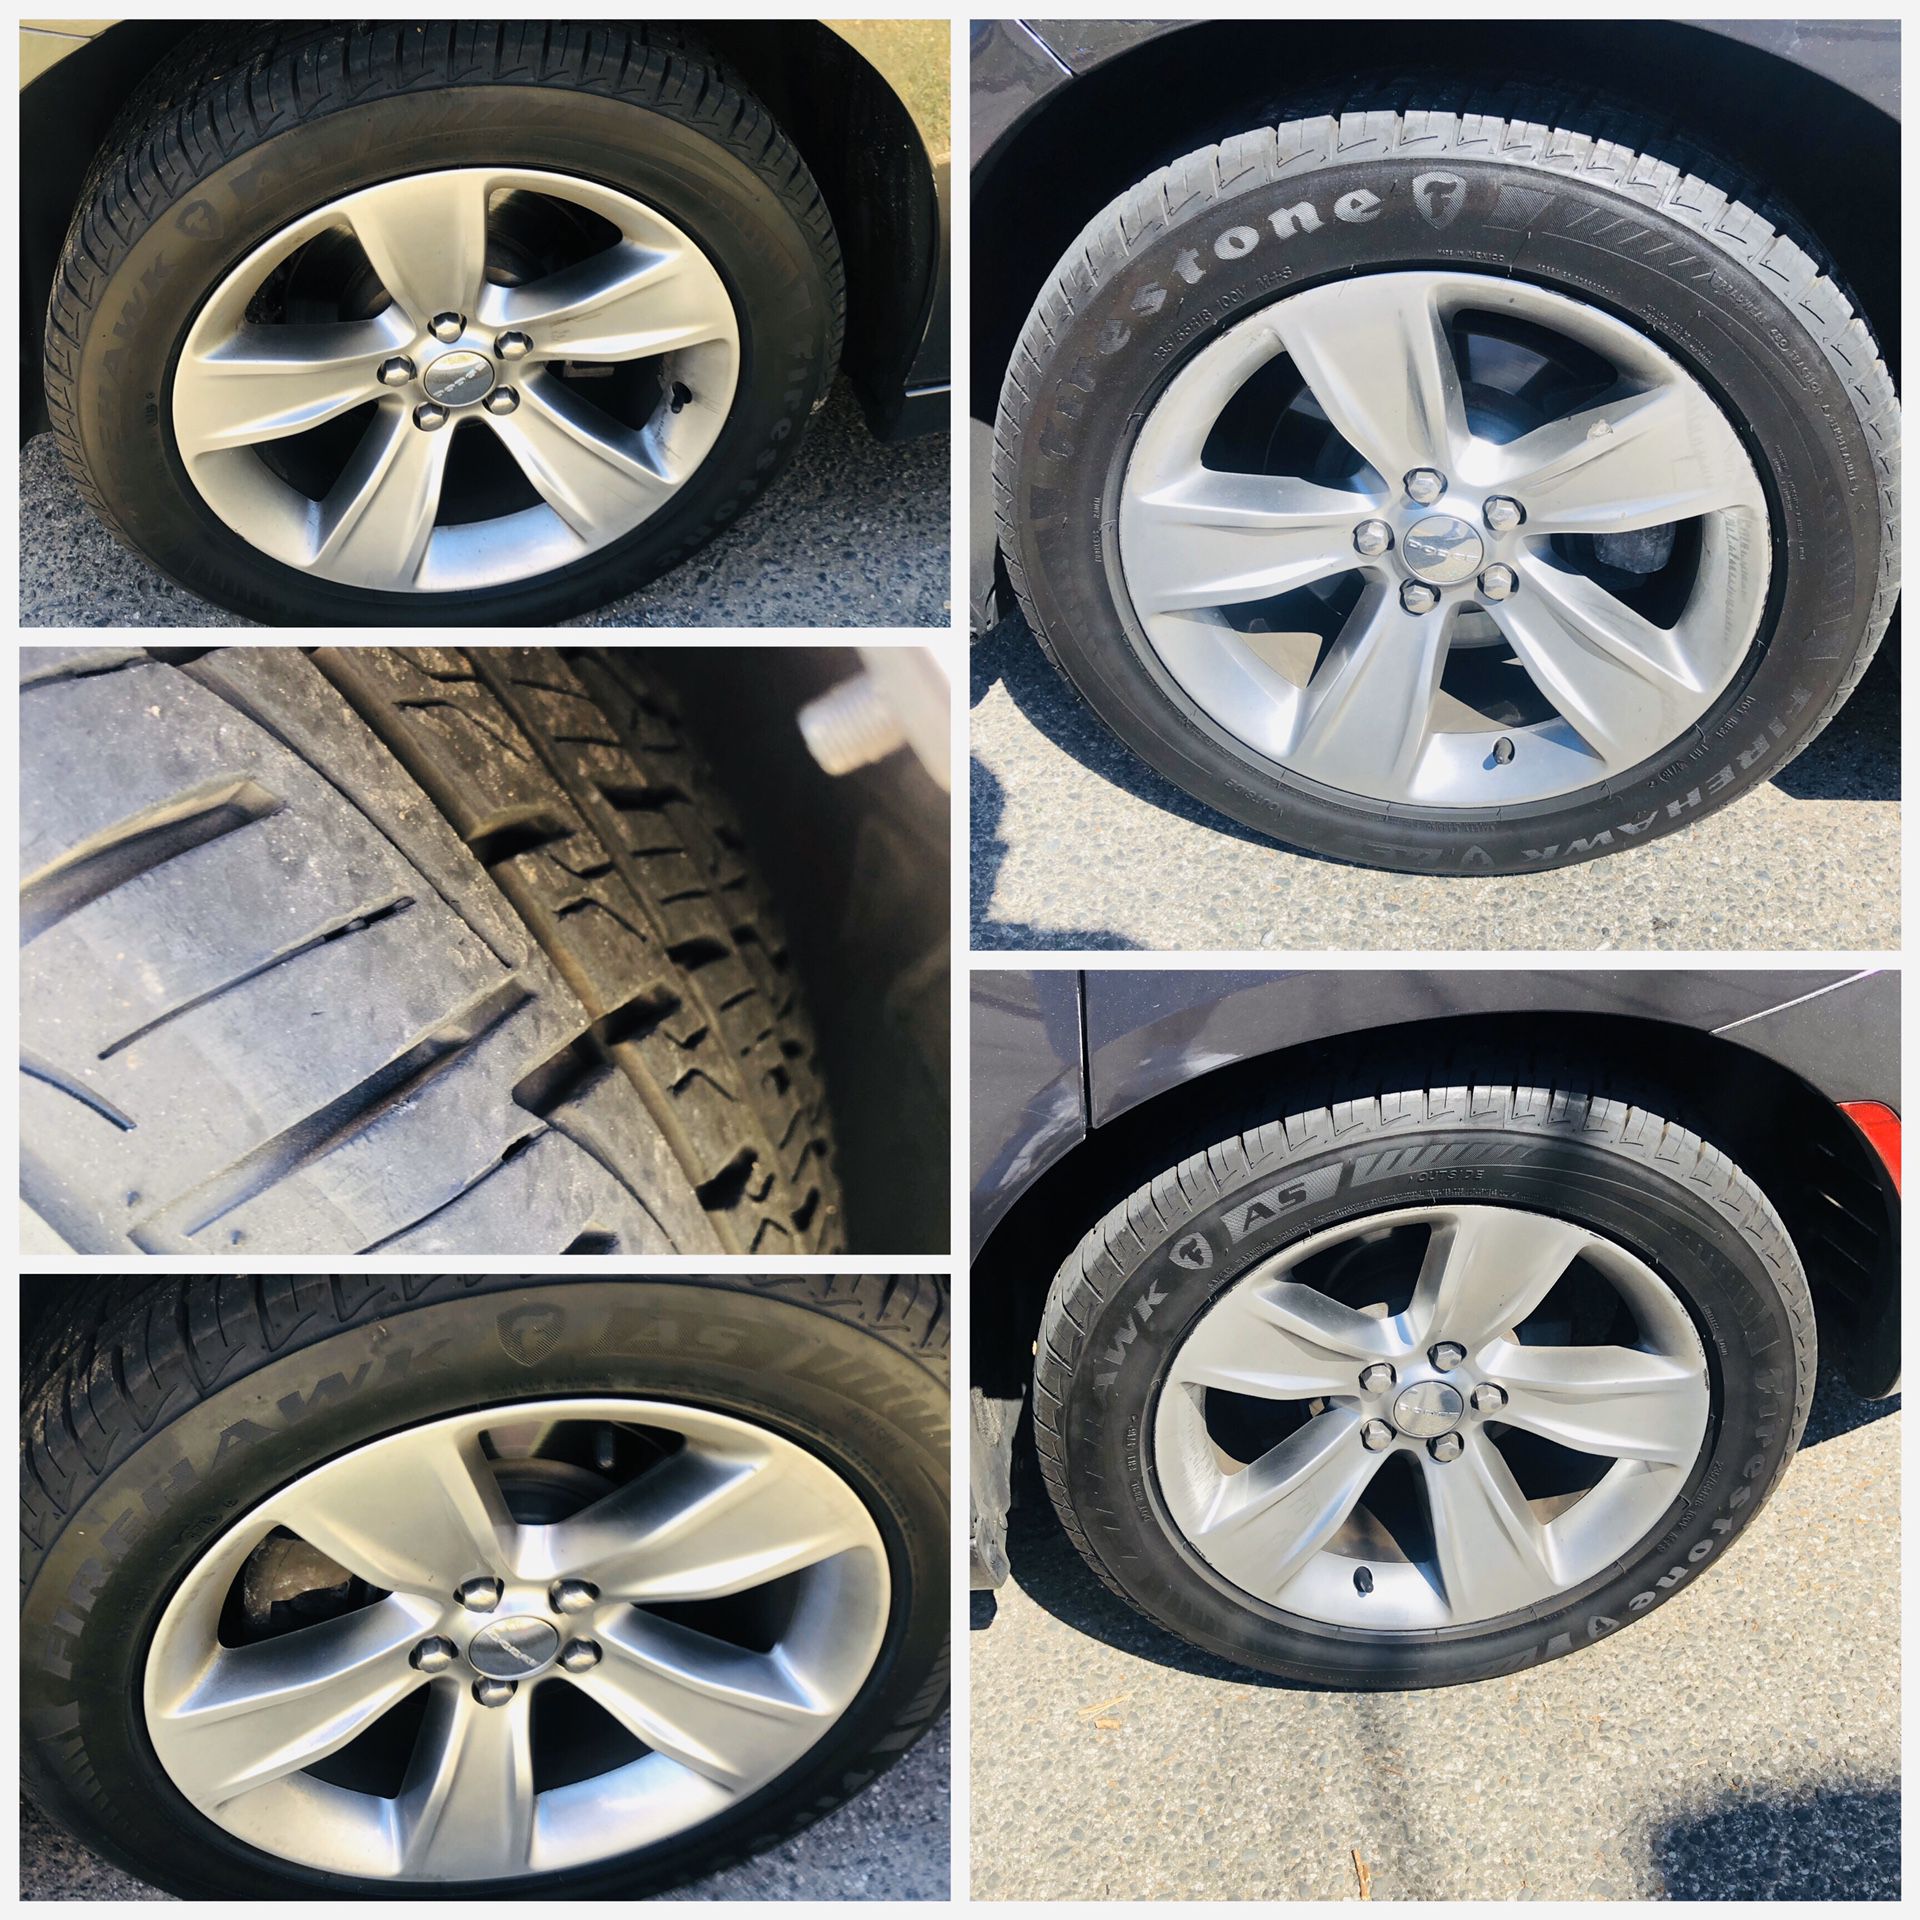 Dodge Charger/Challenger 18” rims and tires included